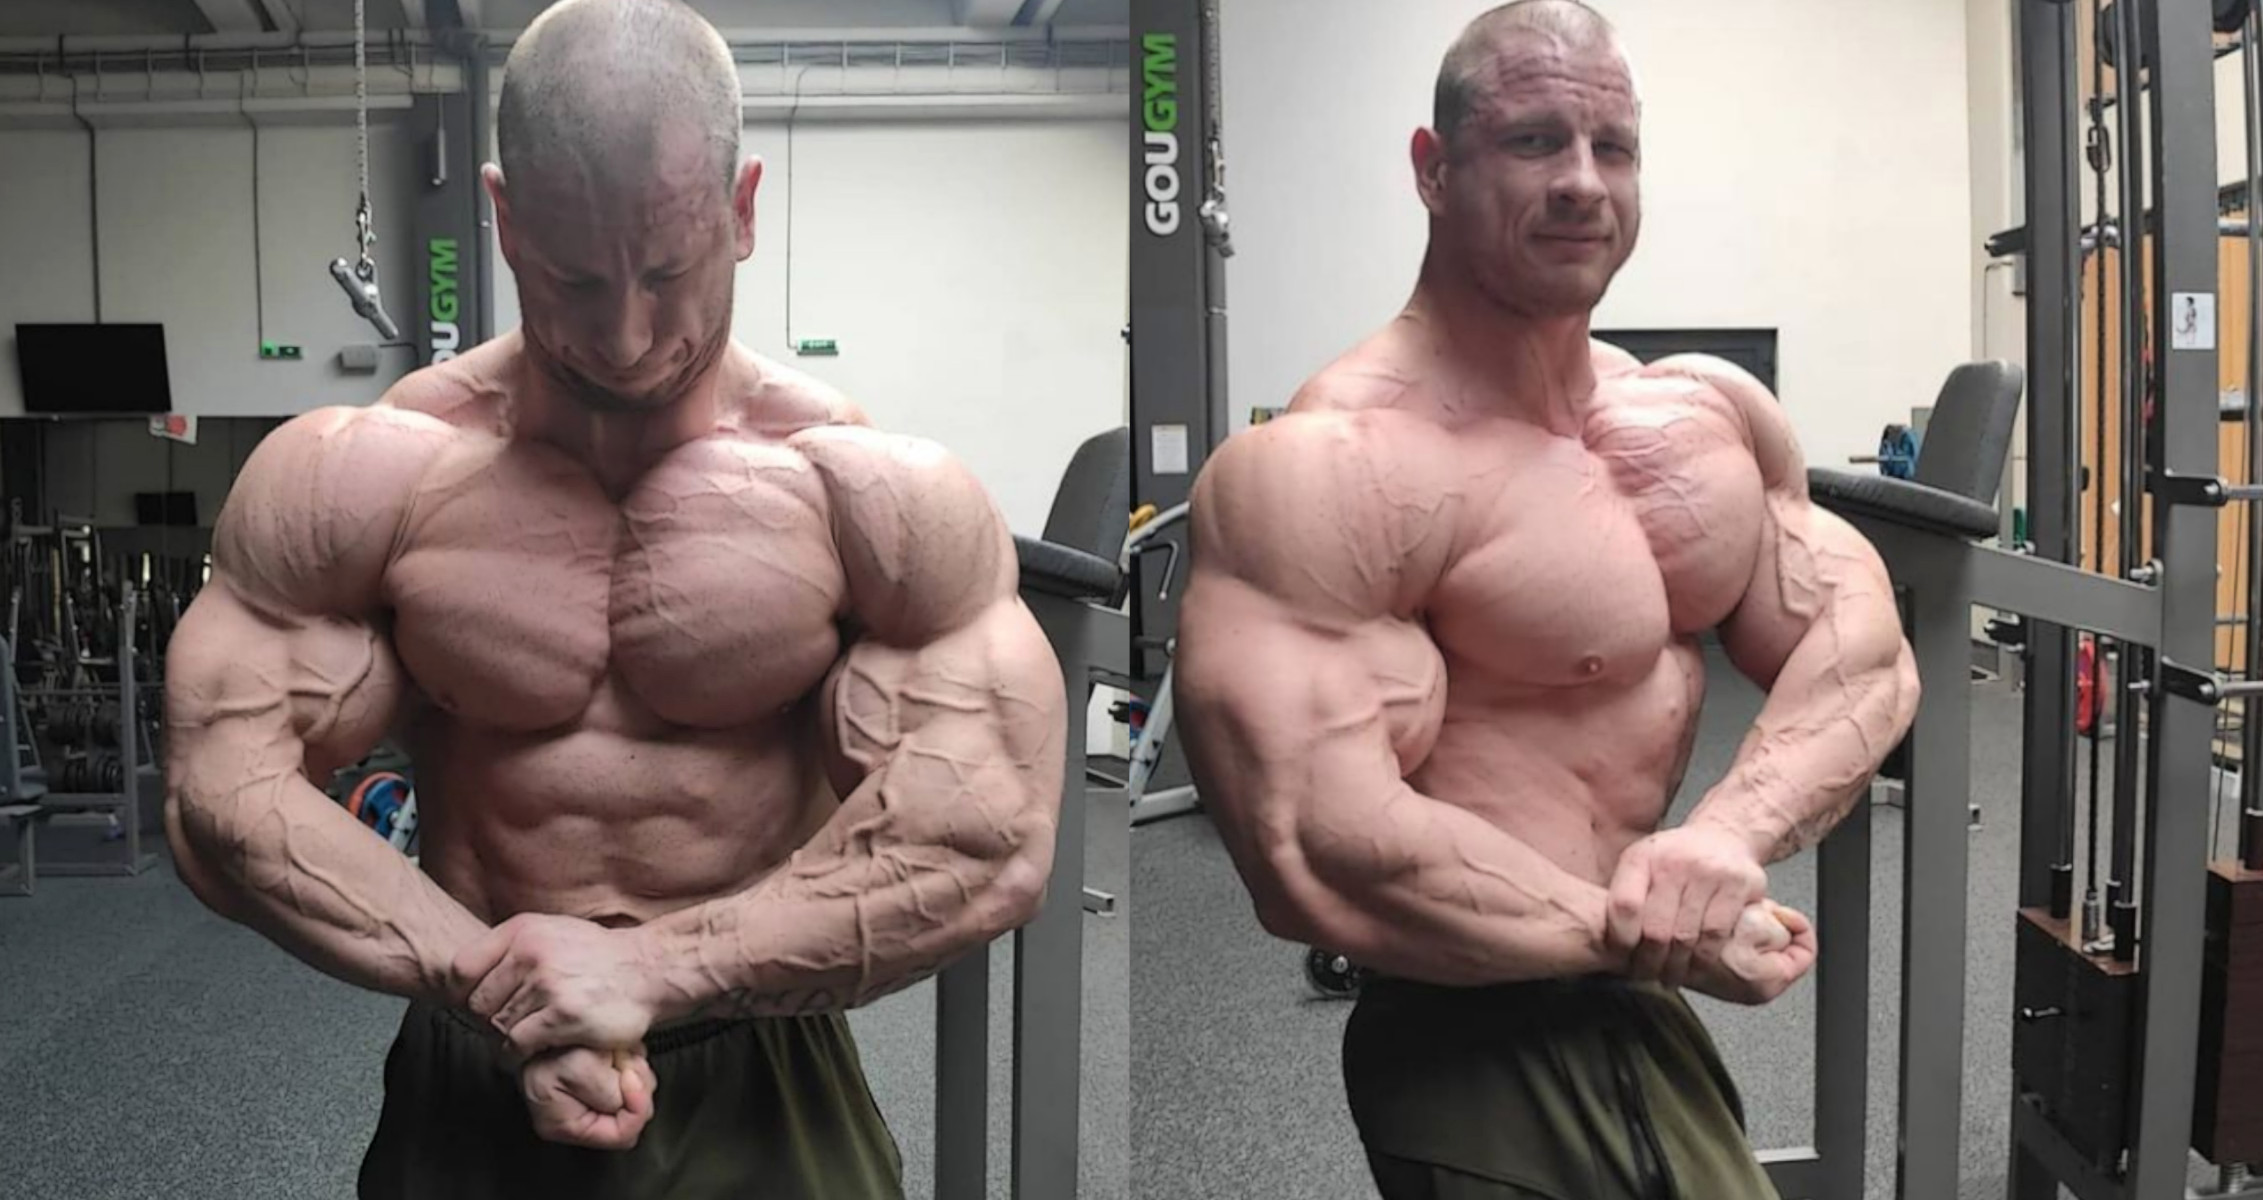 Michal-Krizo-Has-One-of-the-Craziest-Physiques-Outside-the-IFBB-Pro-League.jpg